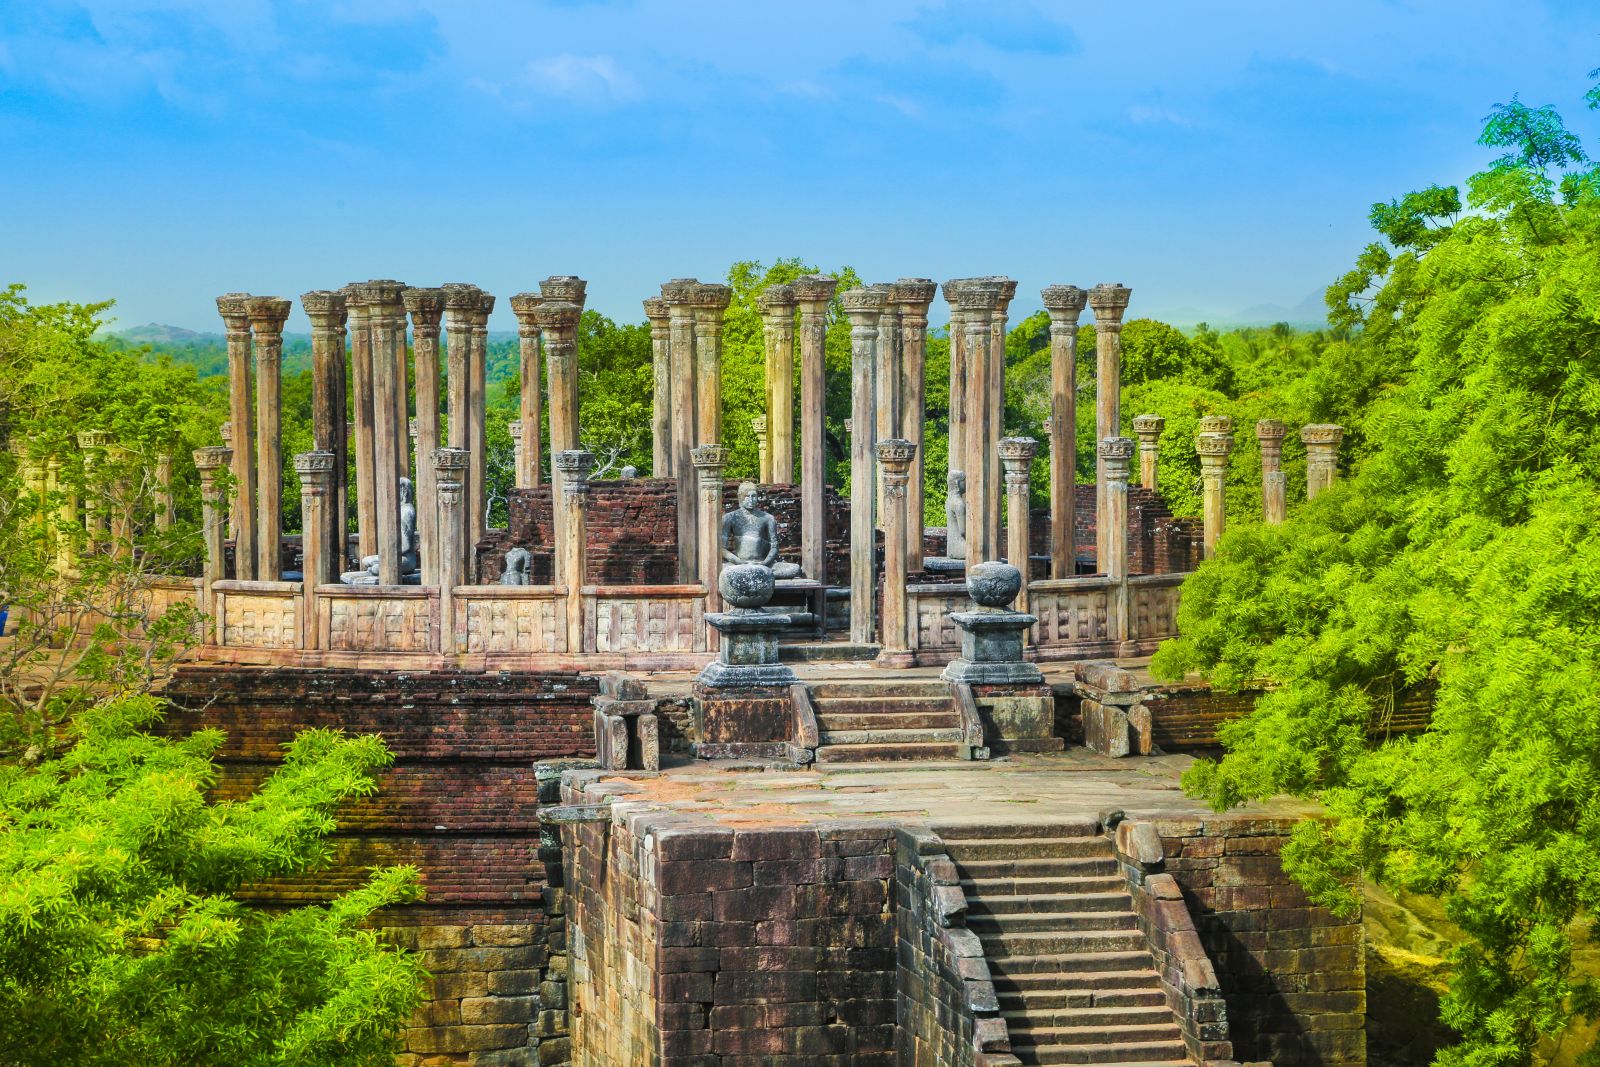 Temple complex with towering columns at Polonnaruwa in Sri Lanka